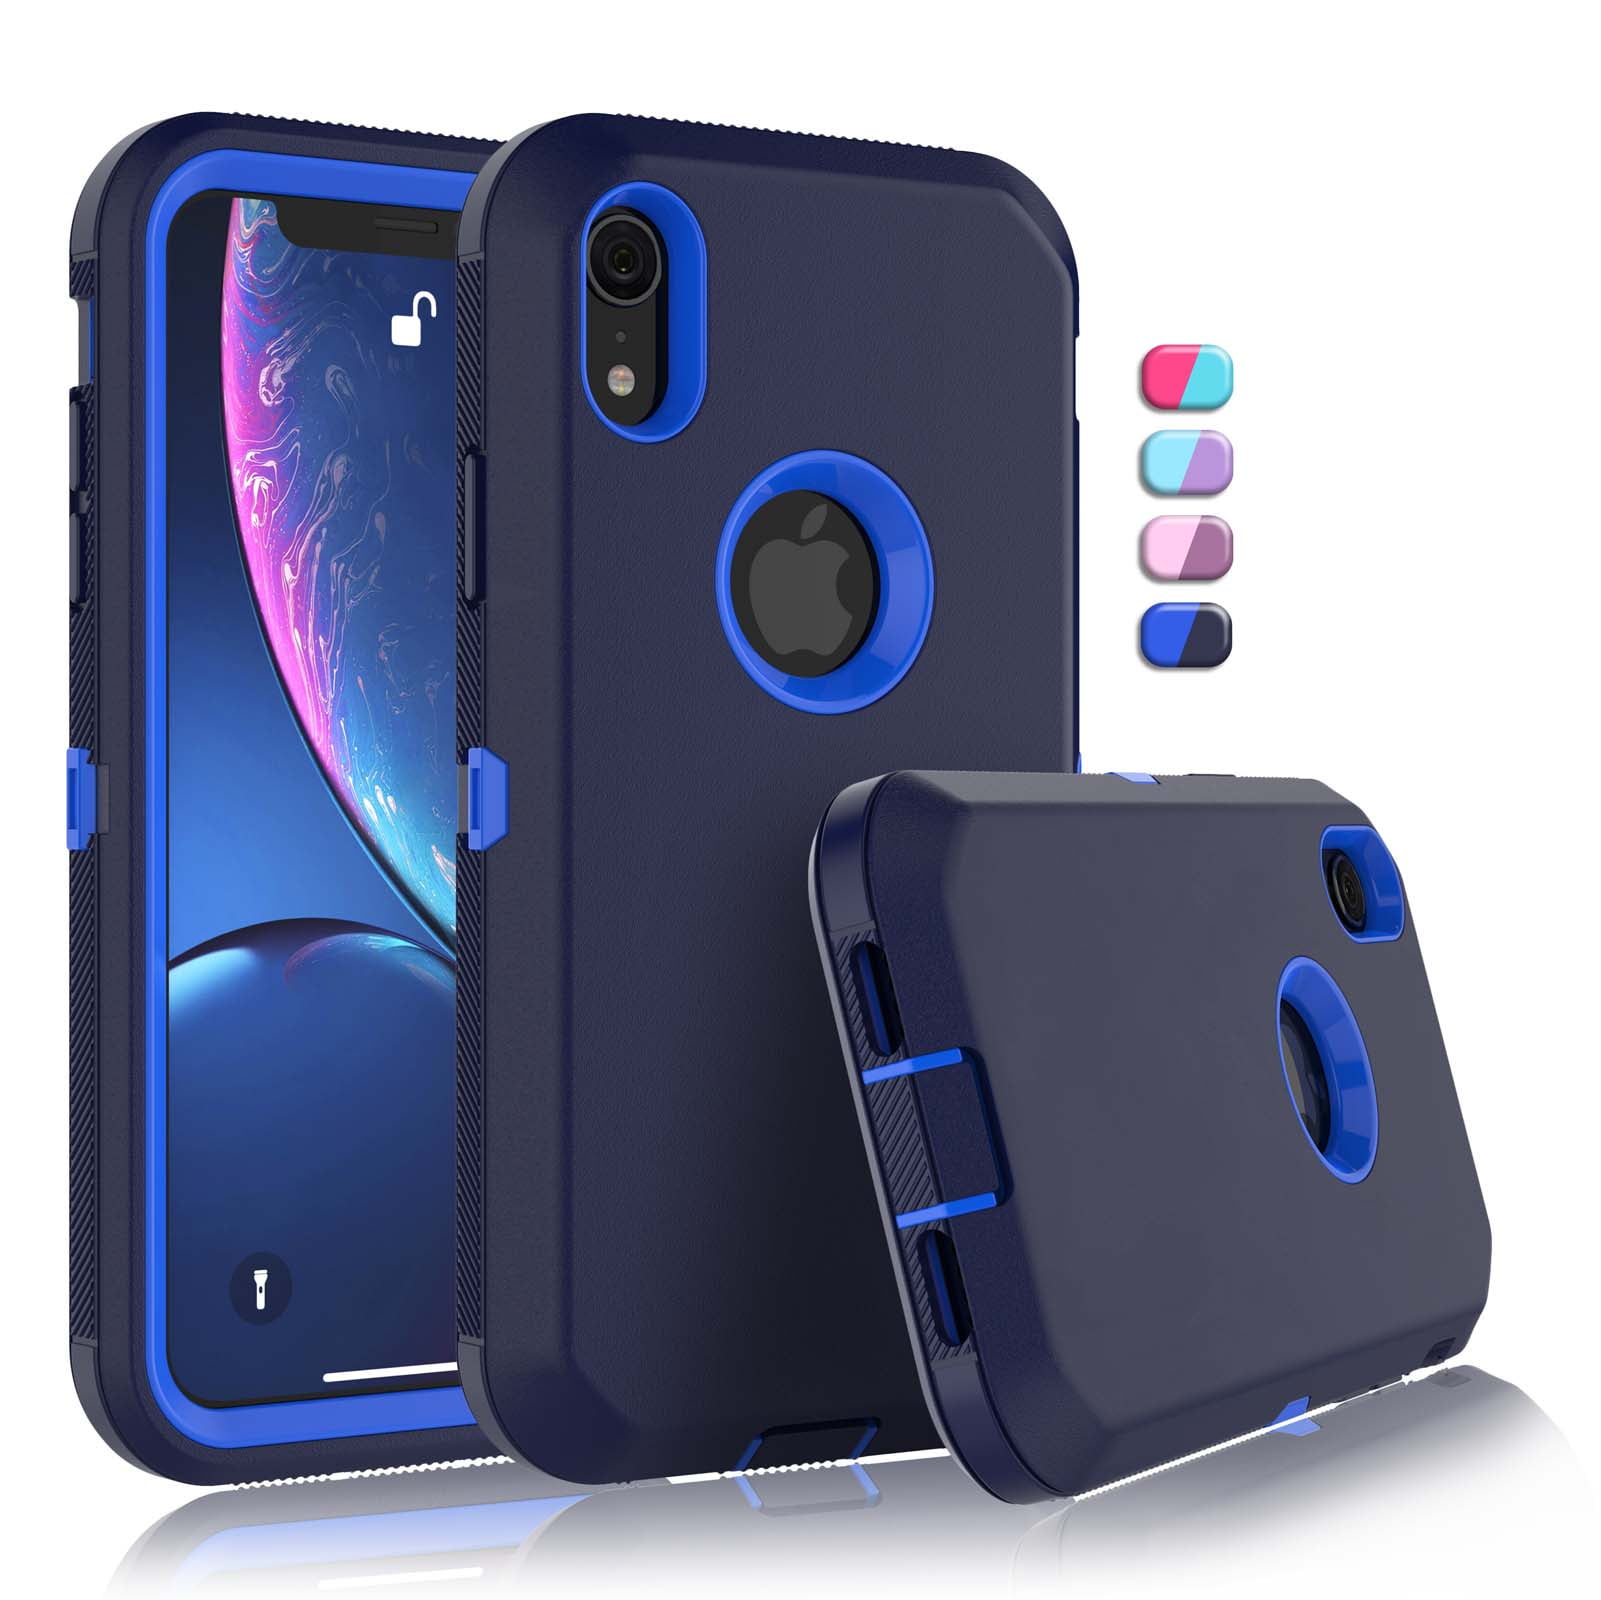 iPhone 11 Cases, Sturdy Phone Case for Apple iPhone 11 6.1, Tekcoo  Full-Body Shockproof Protection Heavy Duty Armor Hard Plastic & Shock  Absorption Rubber Rugged Bumper 3-in-1 Case Cover 